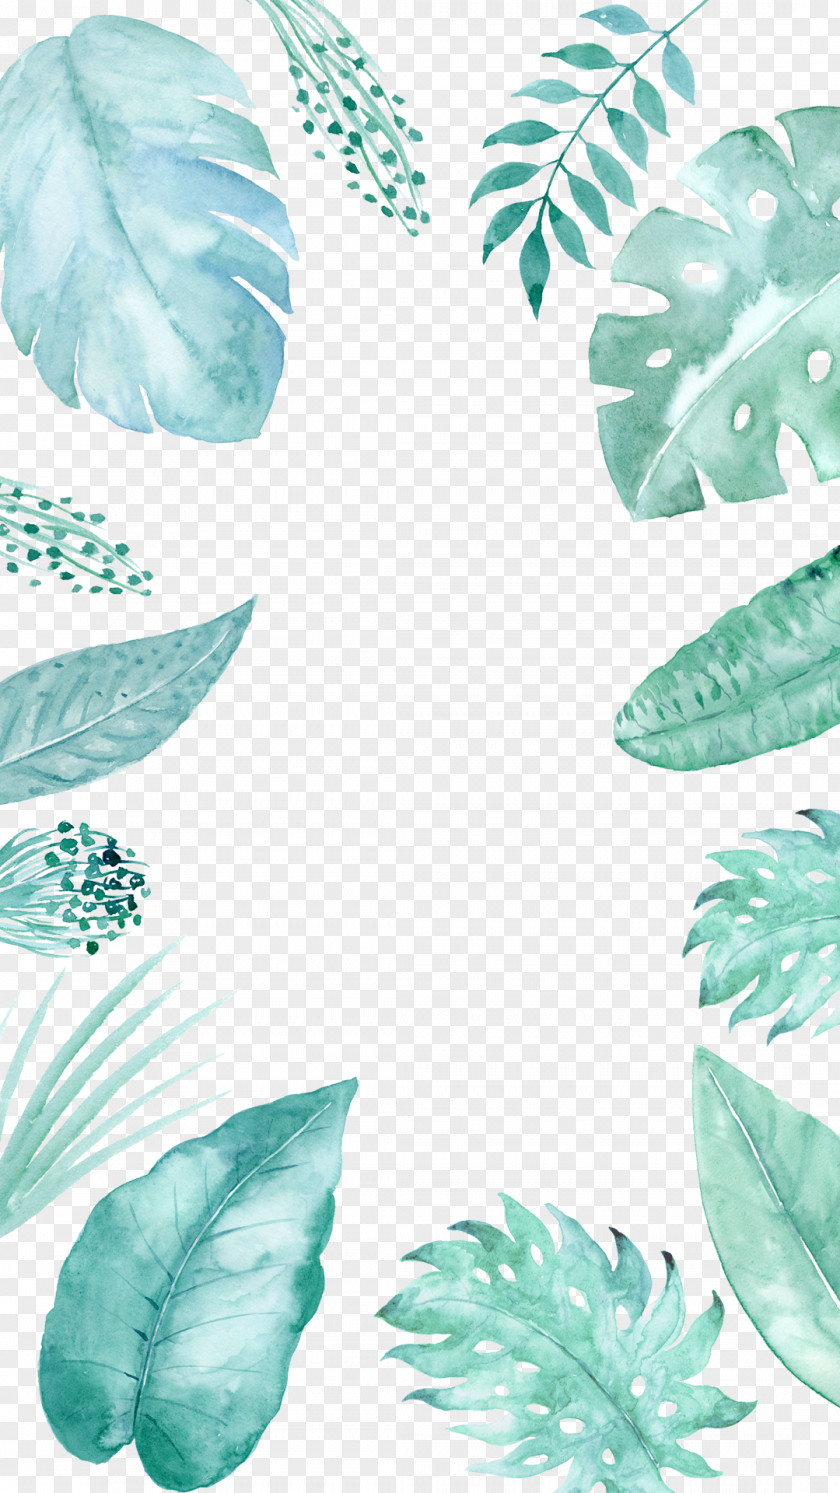 Watercolor, Blue Mint Leaf Effect Watercolor Painting Download PNG